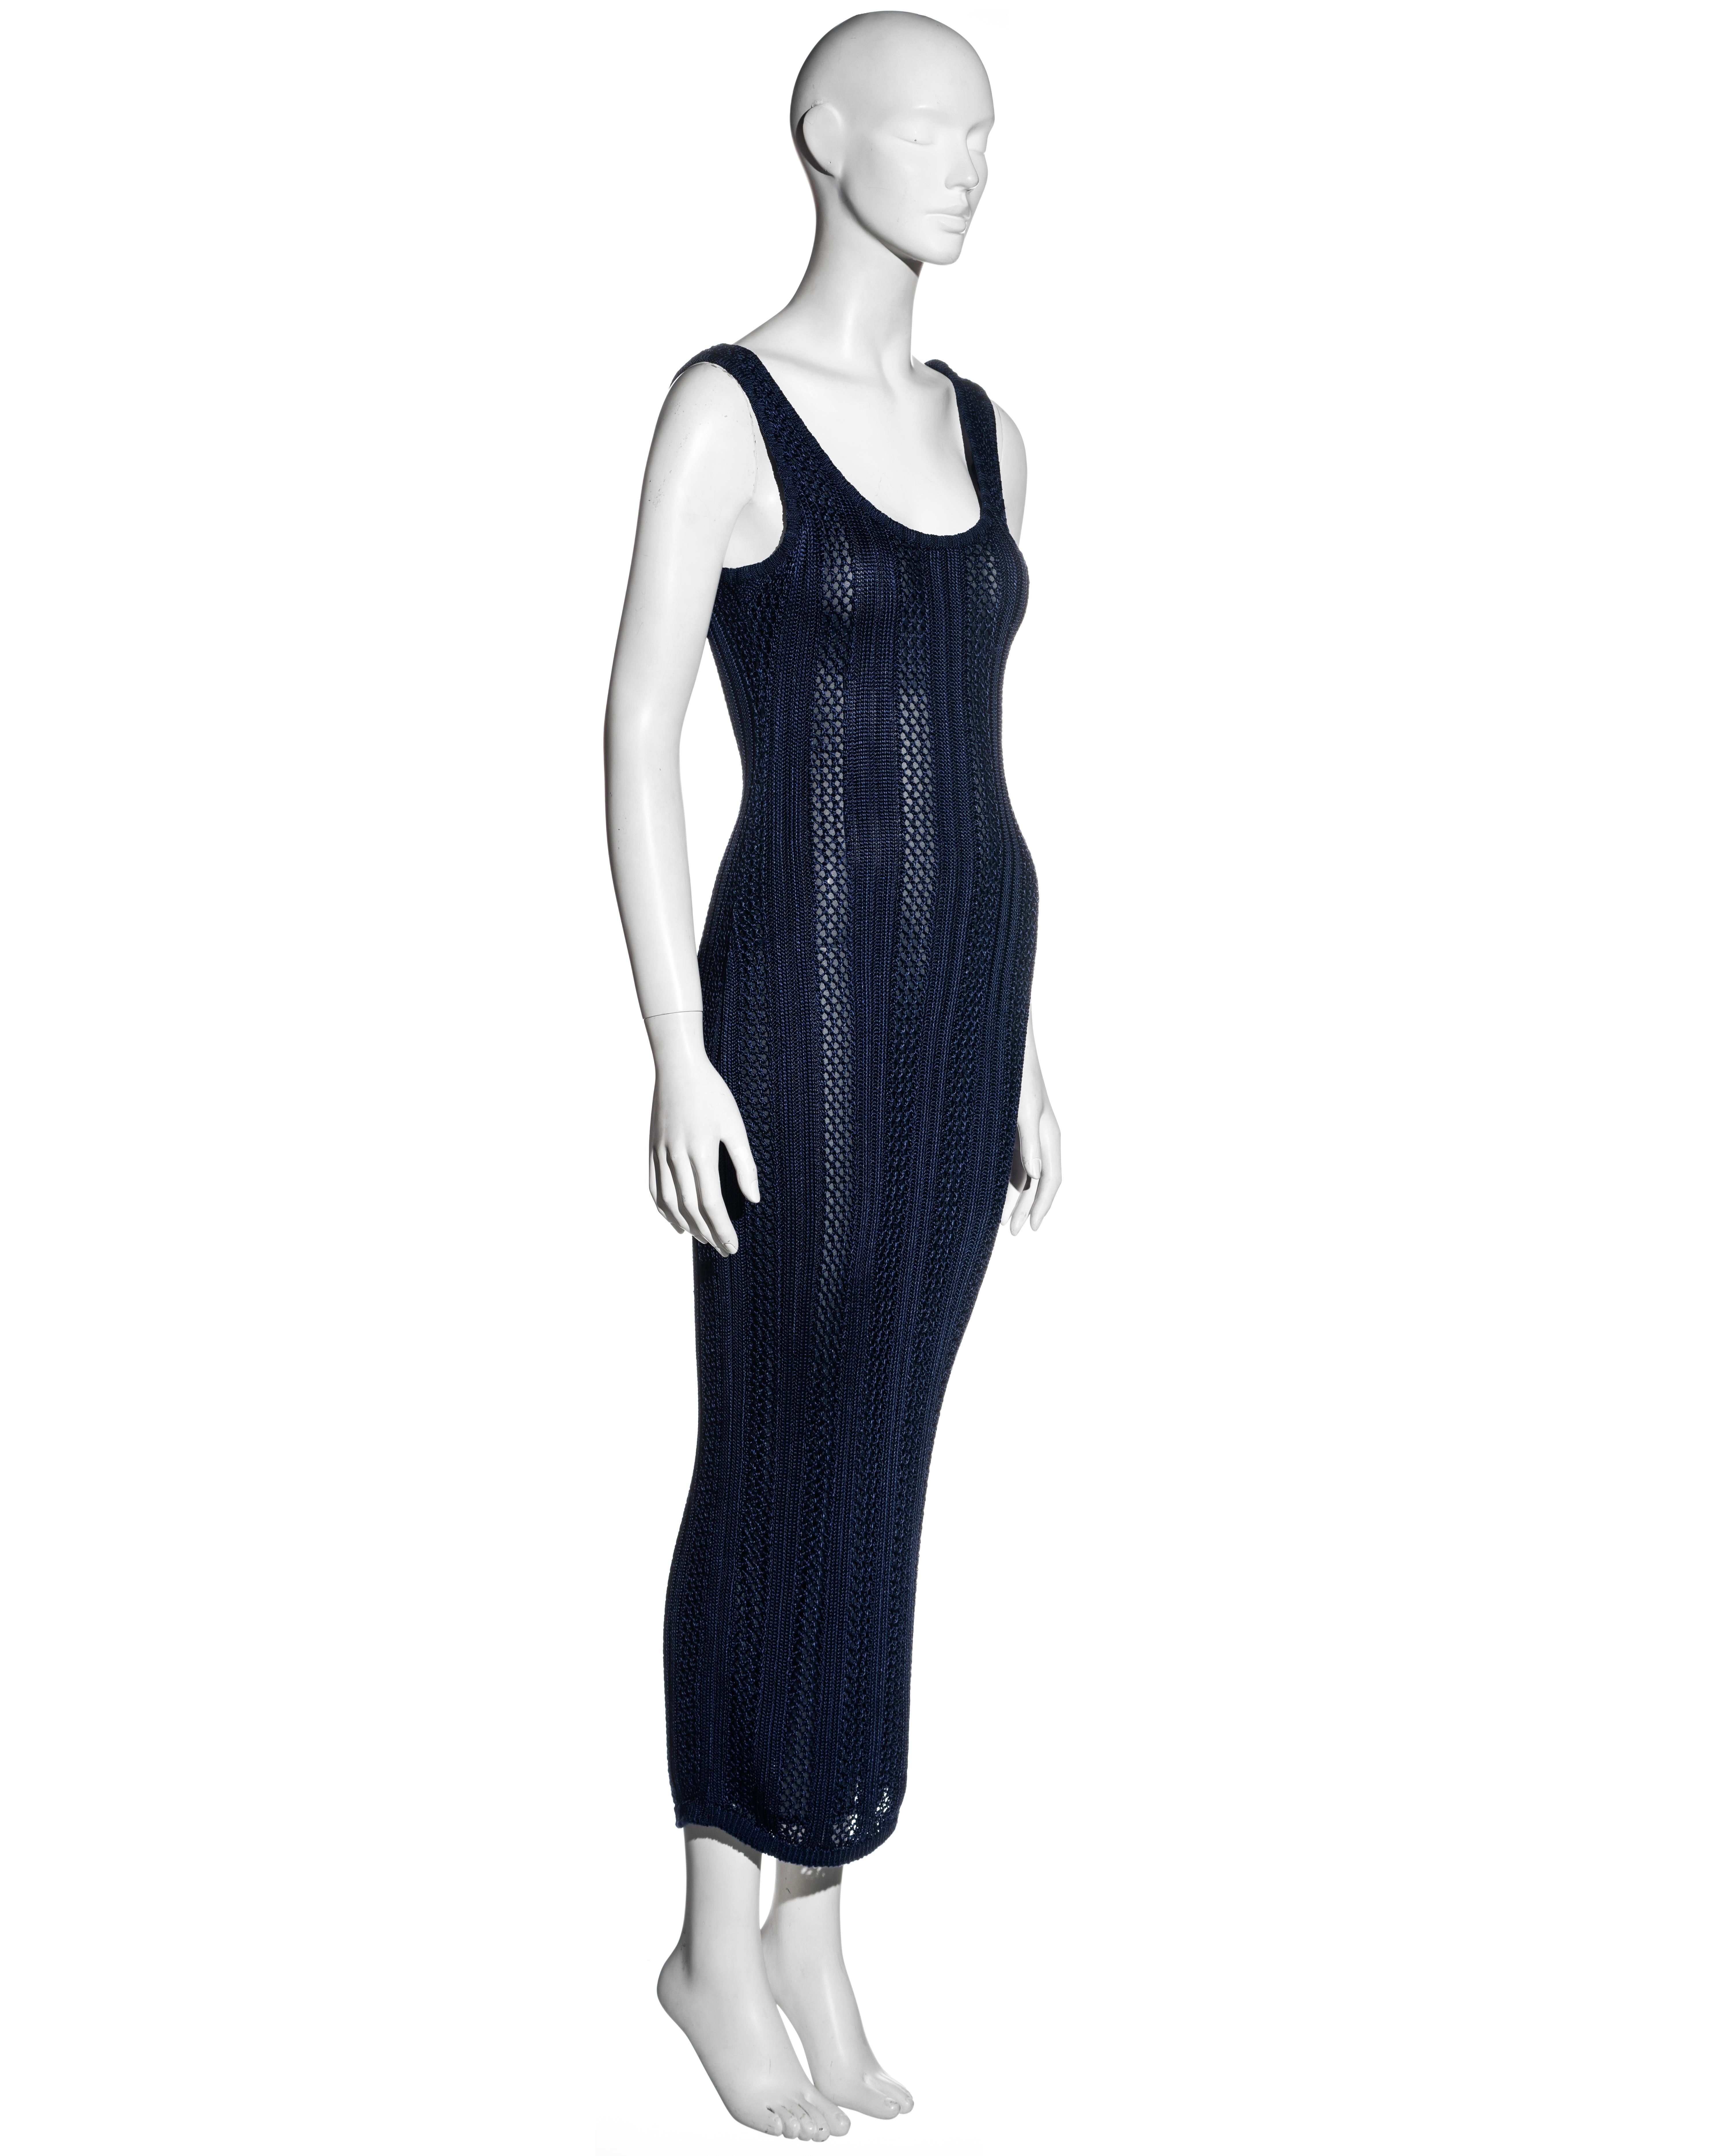 Black Gianni Versace navy blue open-knit bodycon dress and cardigan set, fw 1993 For Sale